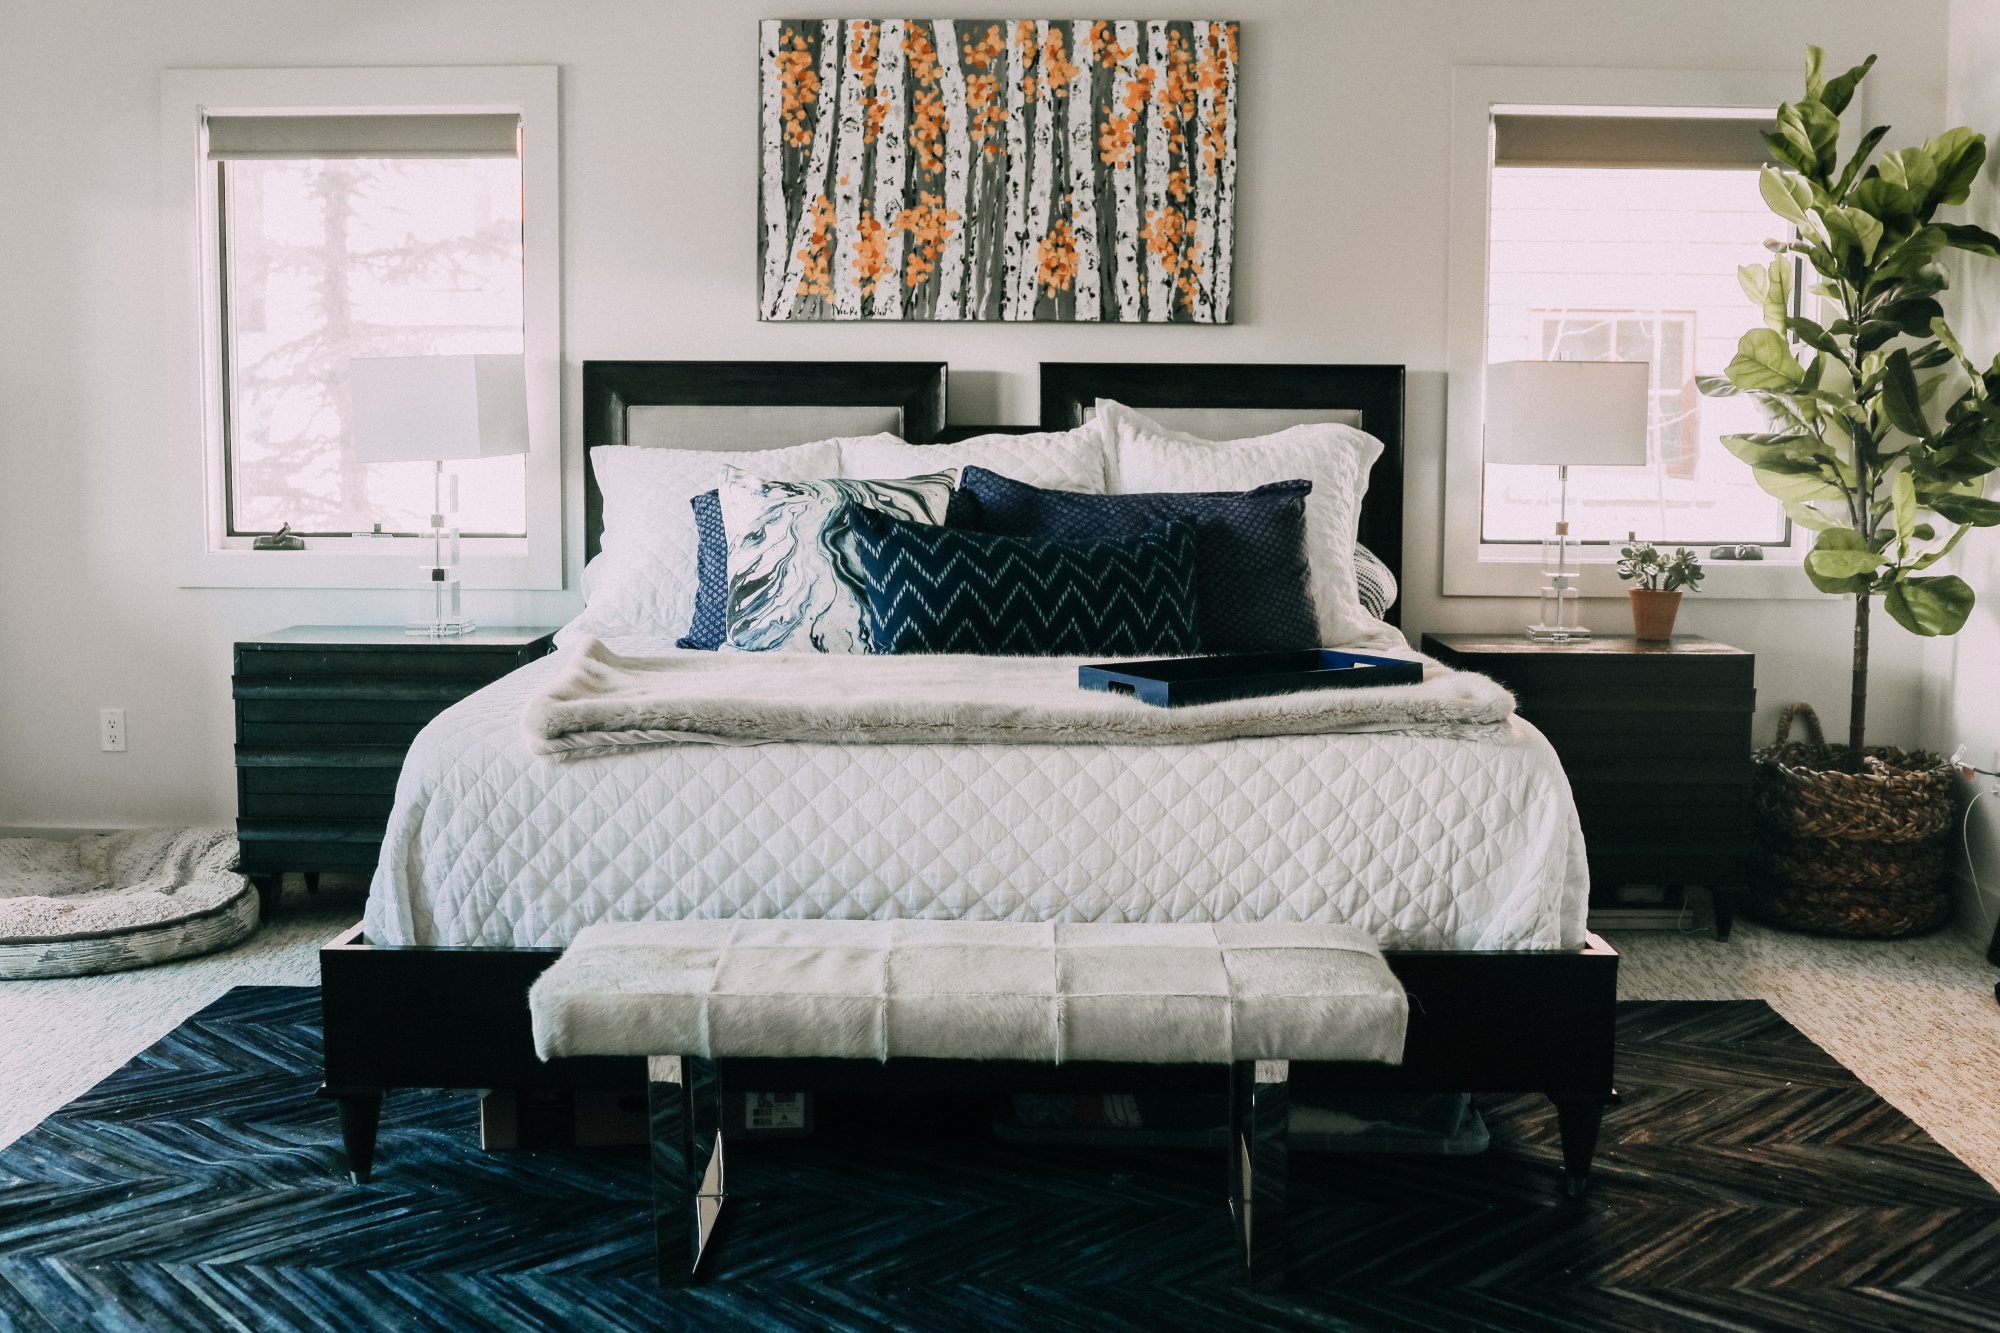 How Many Throw Pillows should you have on a bed, how many throw pillows are too many in modern mountain bedroom in Telluride, Colorado